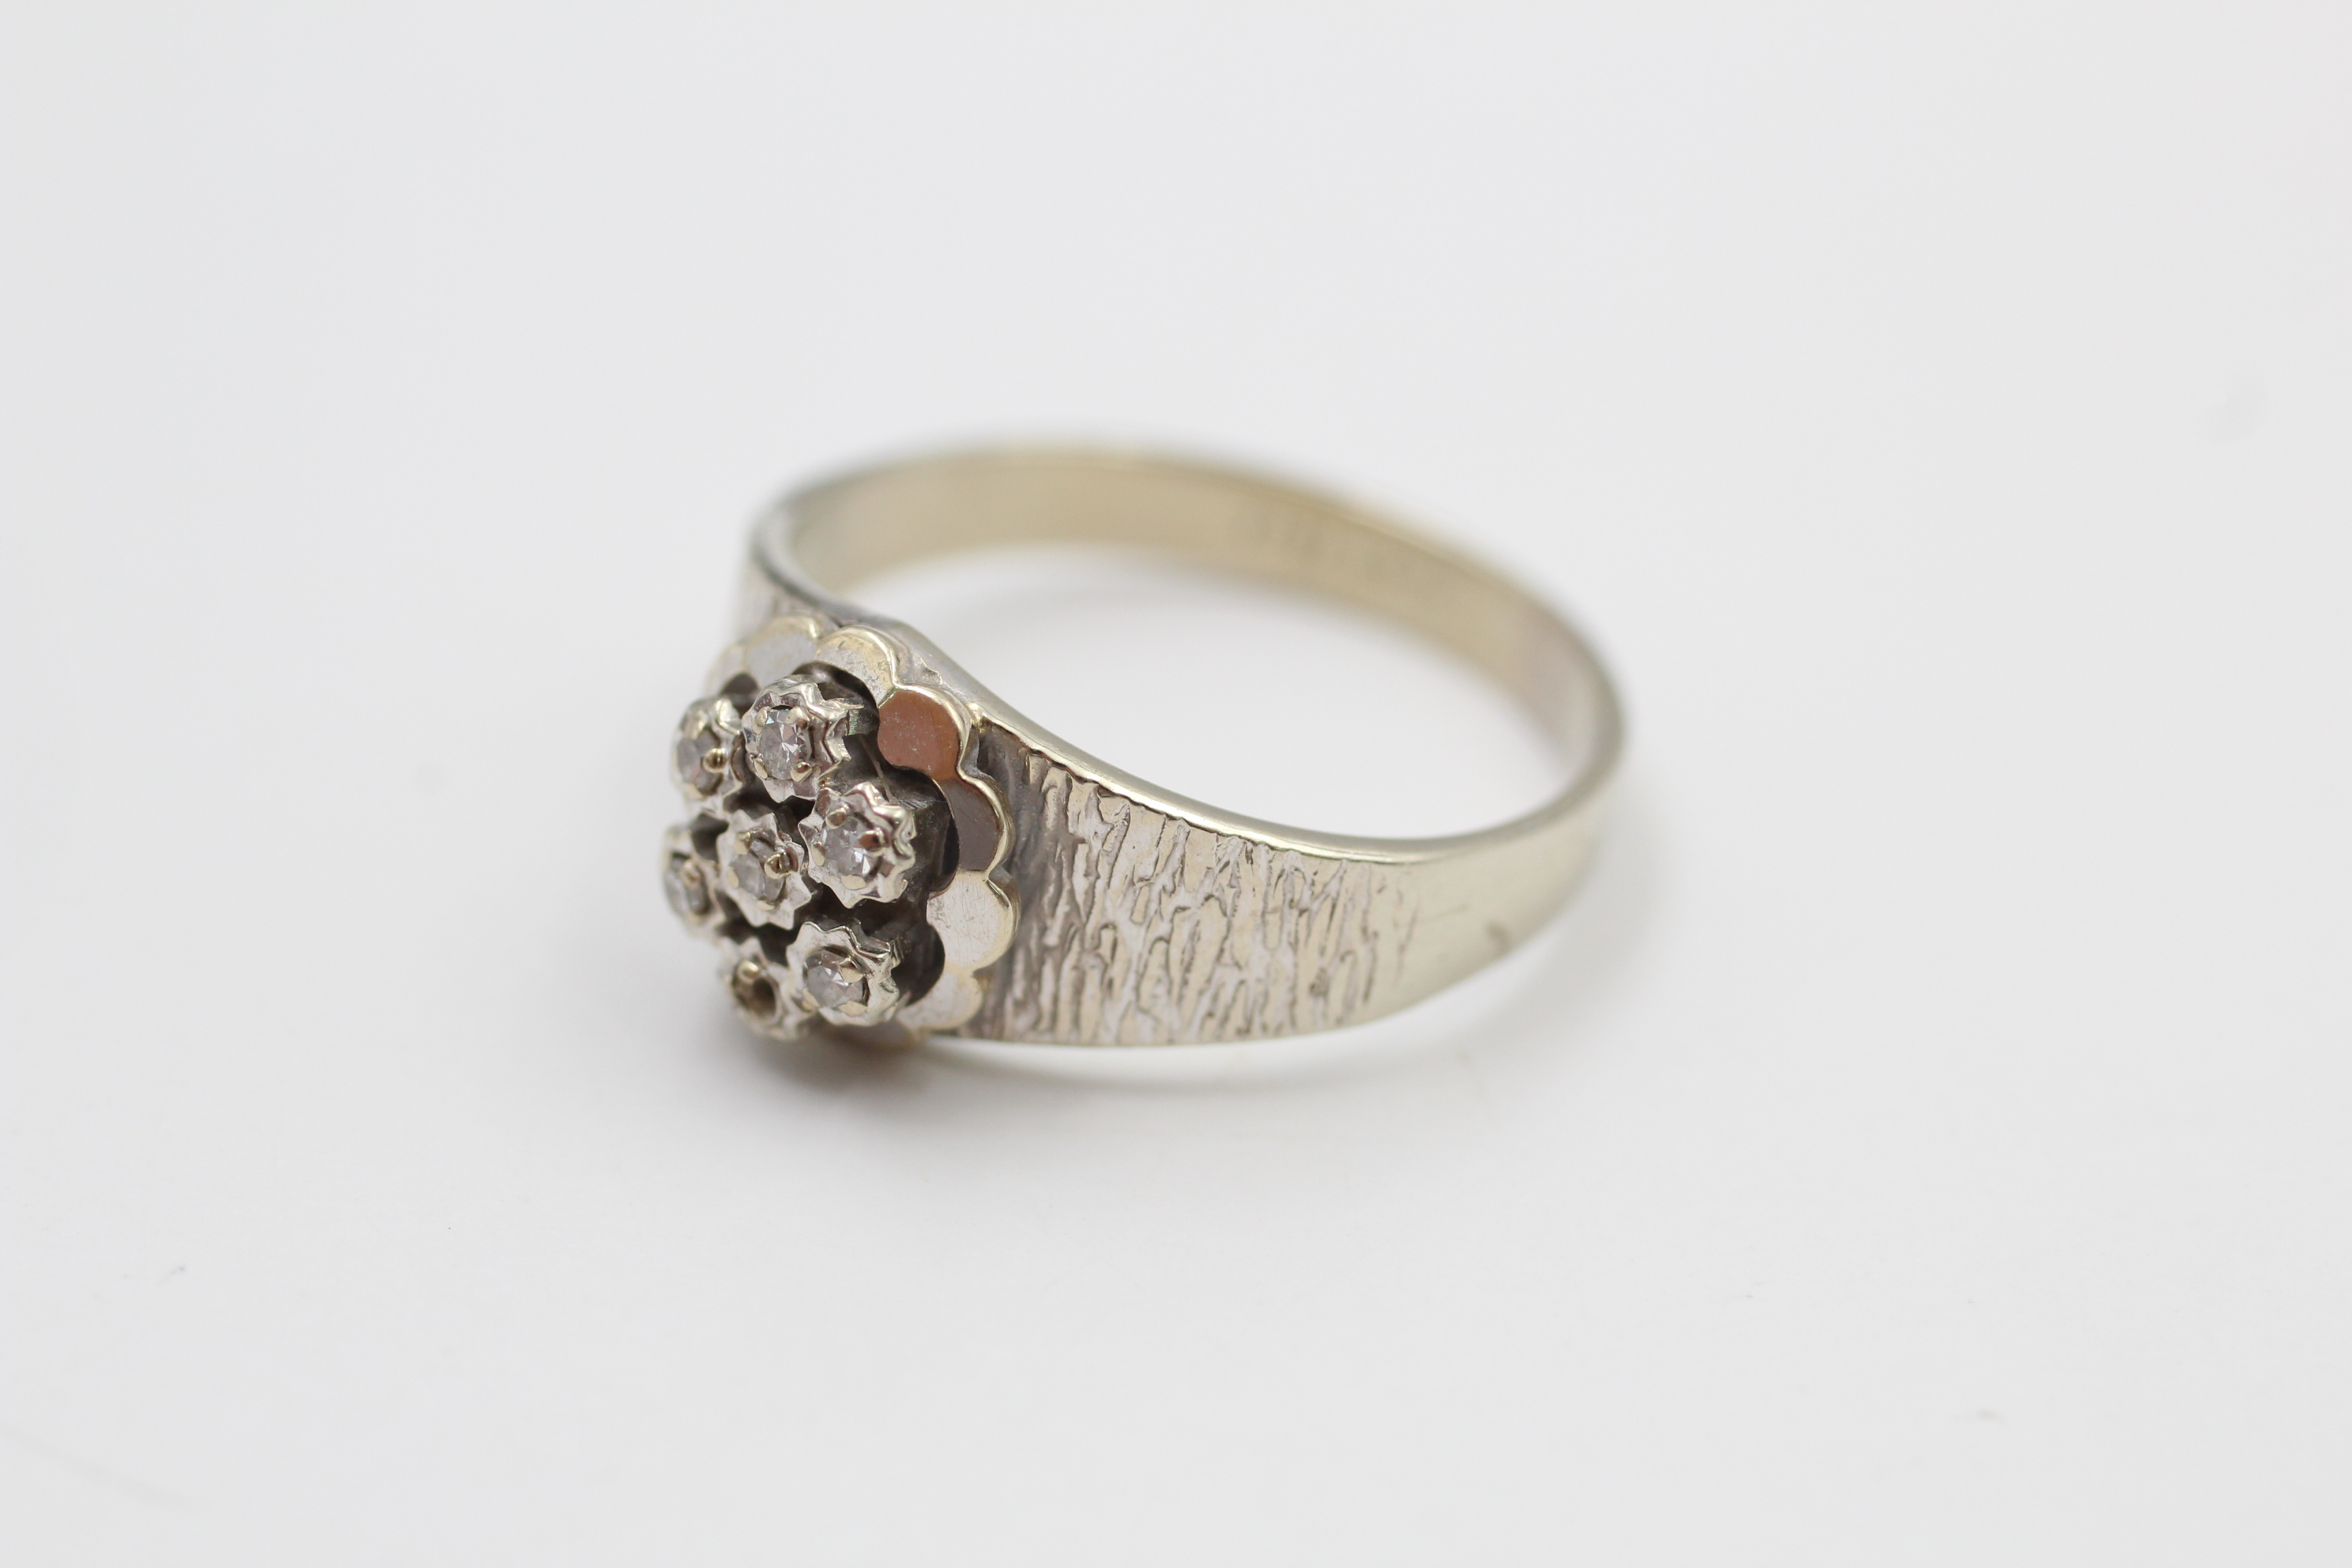 18ct white gold diamond cluster textured shoulder ring ( as seen) (3.7g) - Image 2 of 4